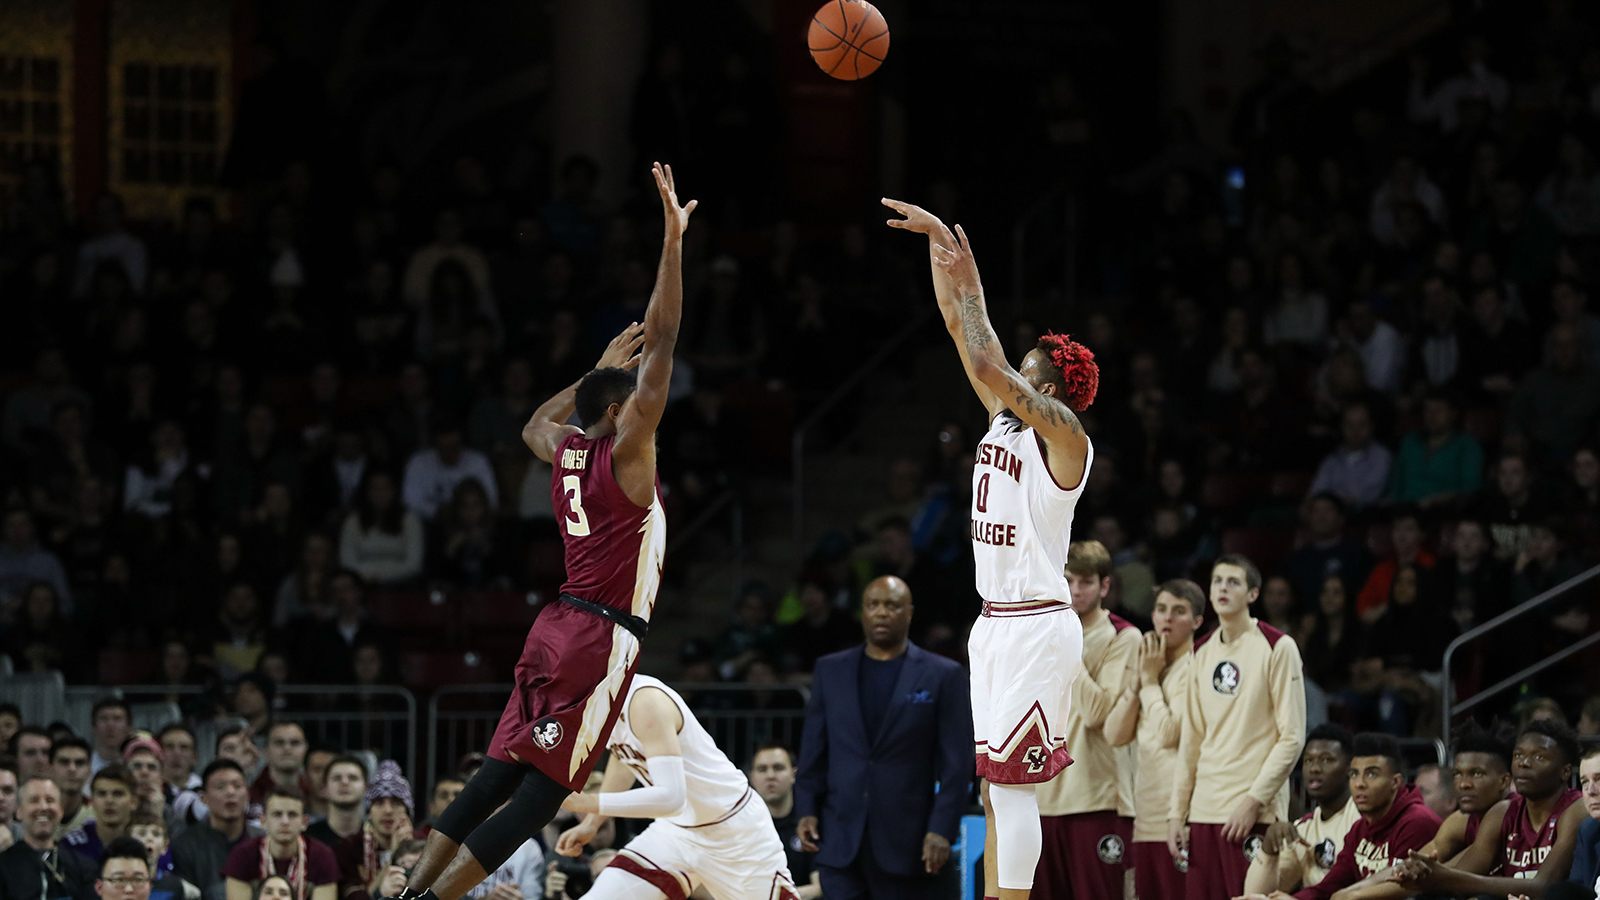 FSU's 2nd-half push comes up short on road against Boston College